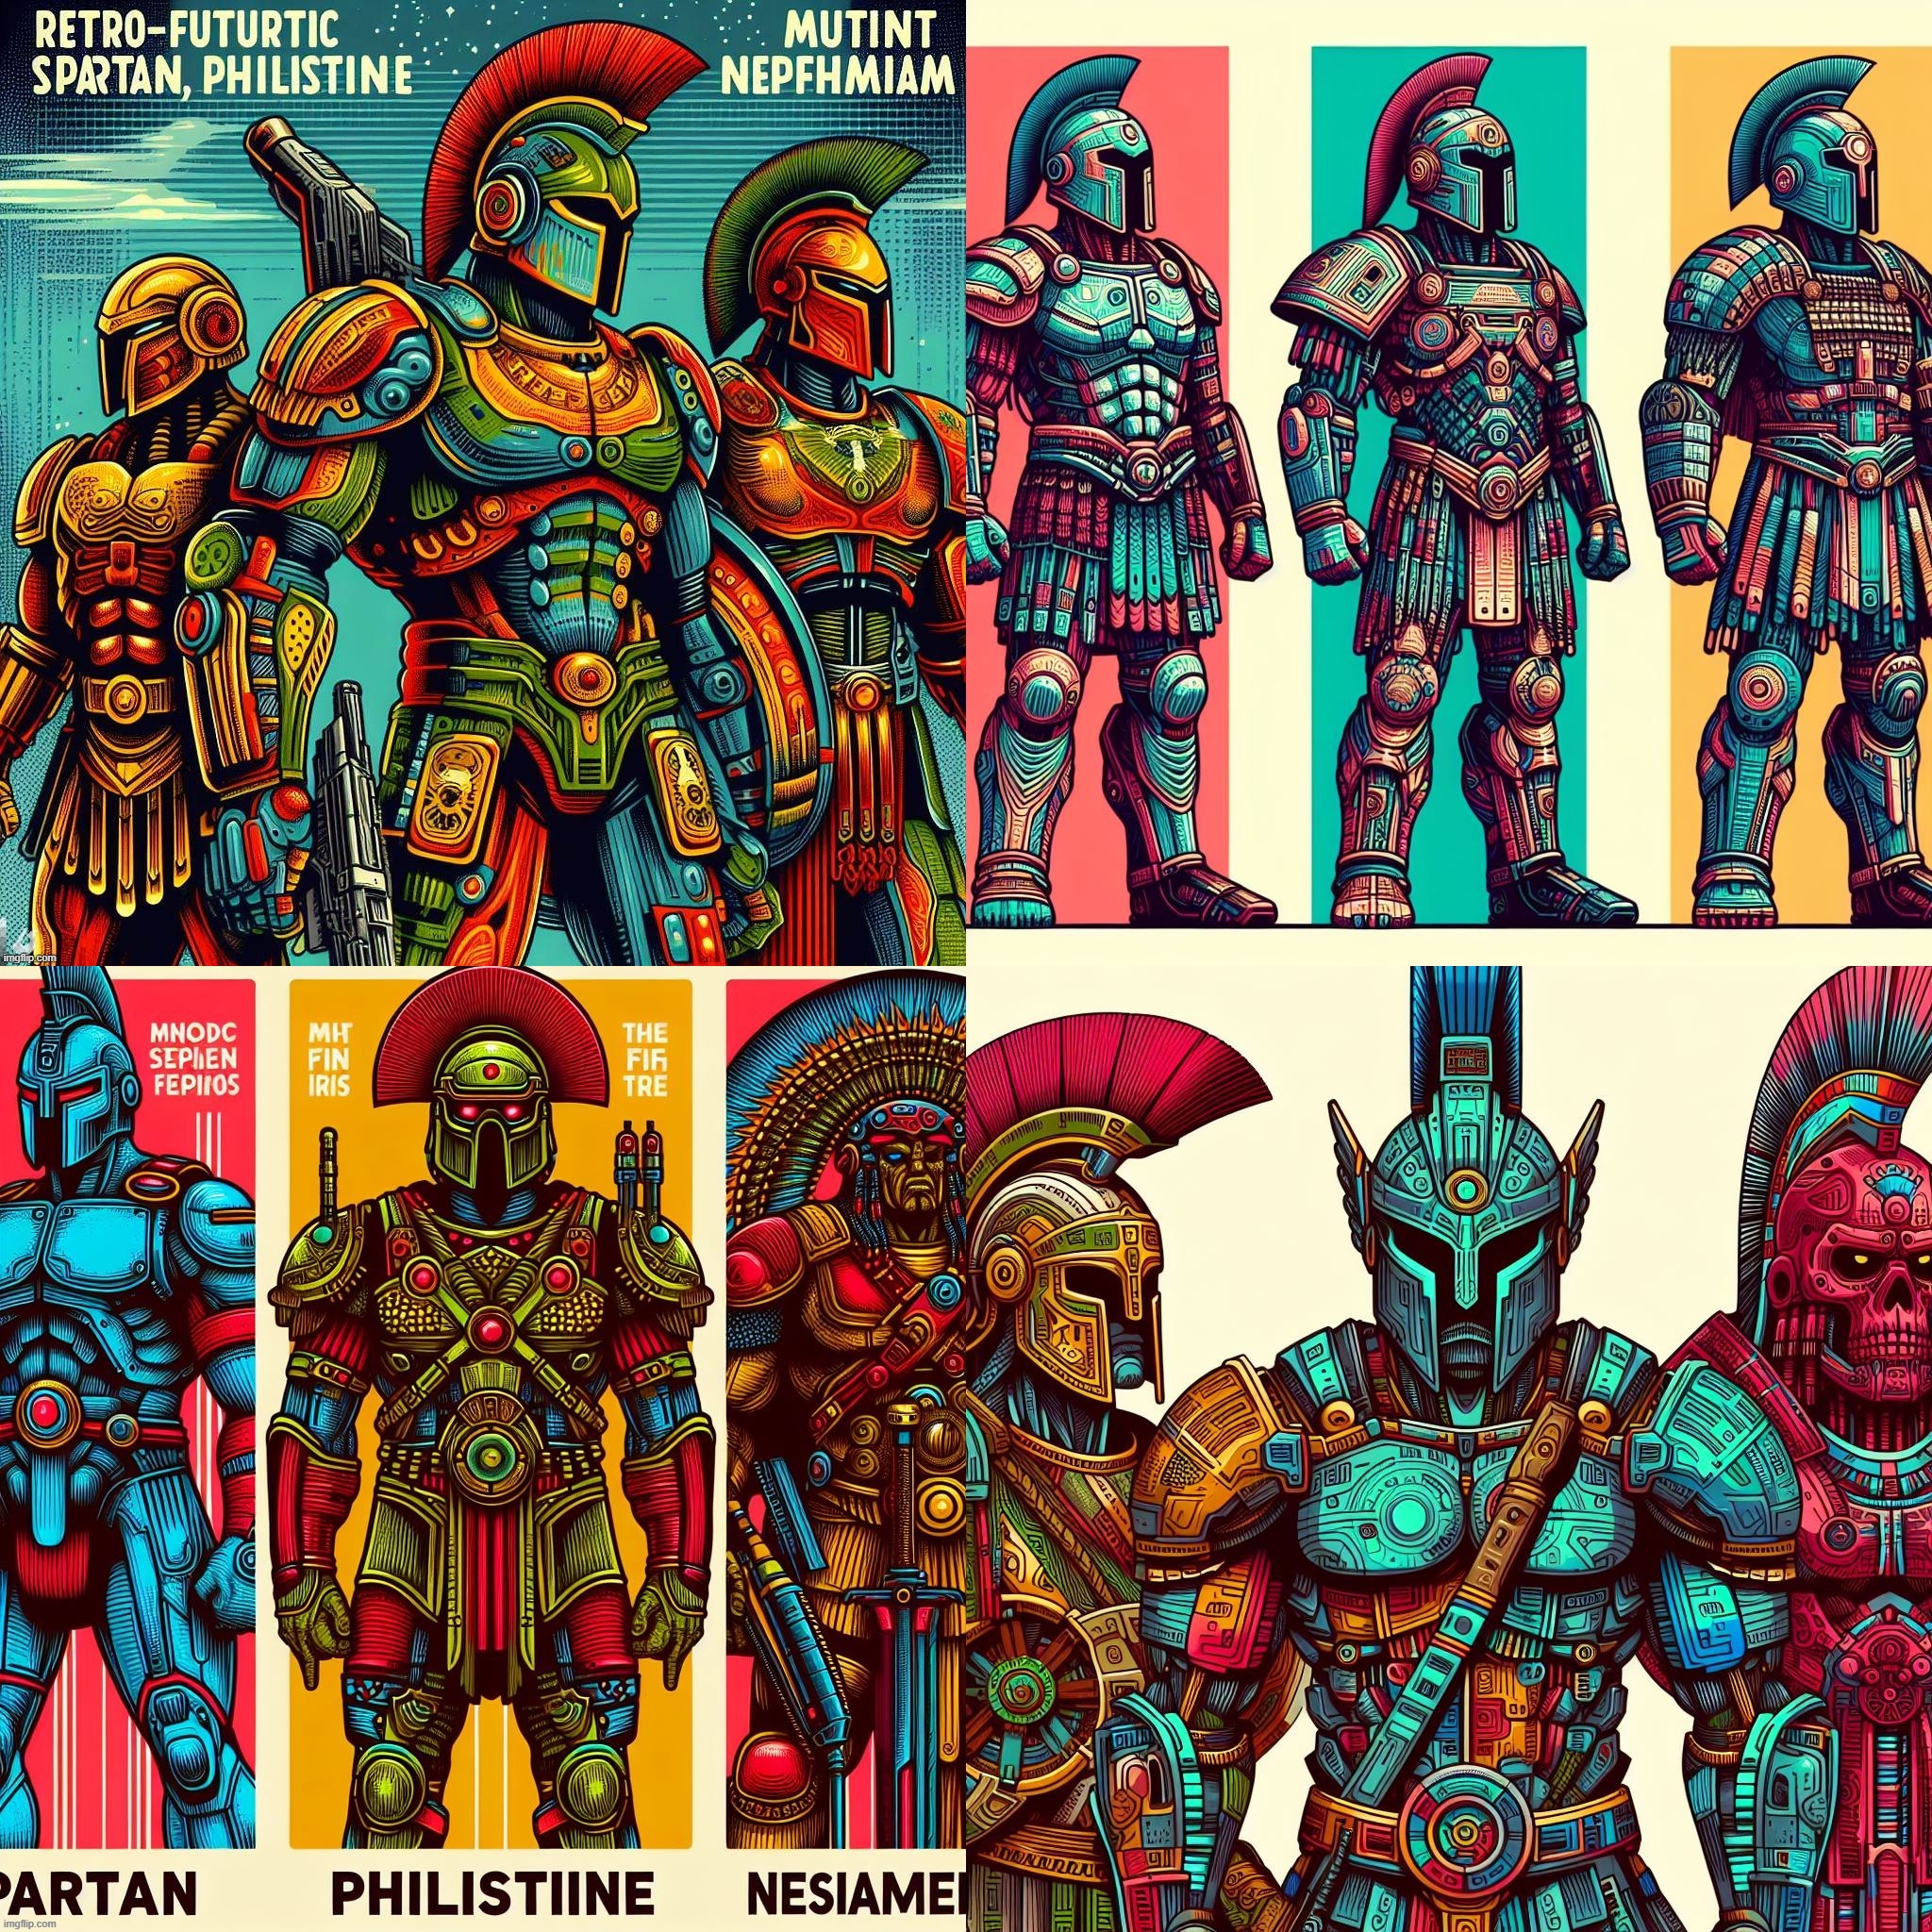 Ai Bing: Retro-Futuristic Spartan, Philistine, and MesoAmerican themed armor worn by Mutant Nephilim Giants. | image tagged in ai generated,spartan,philistine,mesoamerican,retrofuturistic,nephilim | made w/ Imgflip meme maker